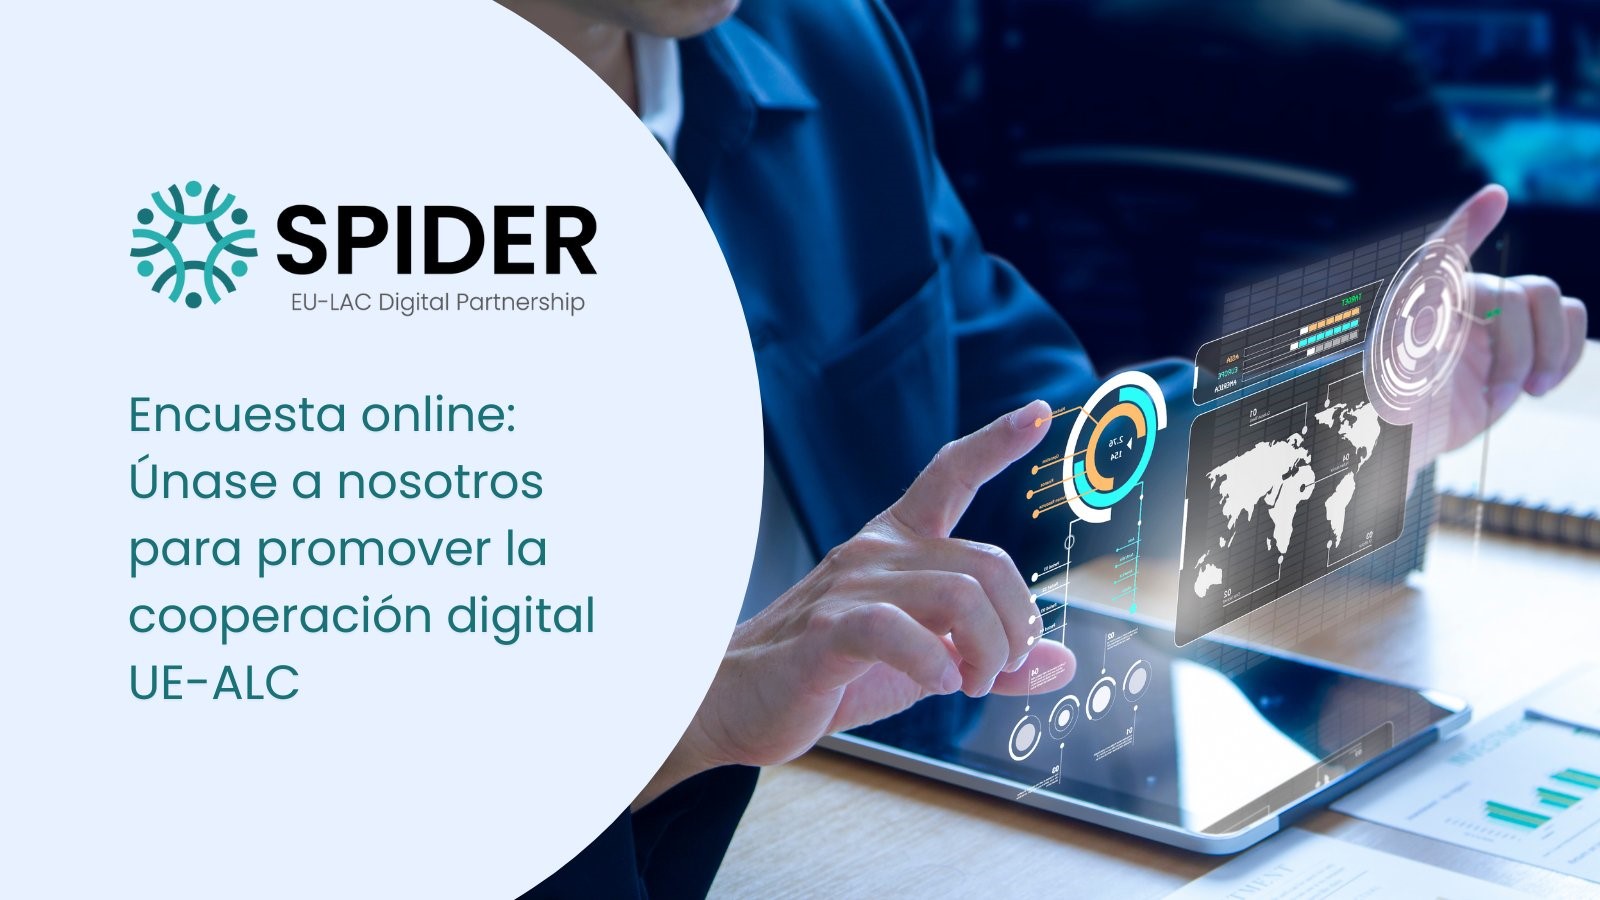 SPIDER project launch survey on the interconnectivity of the digital ecosystem in Latin America and the Caribbean and Europe